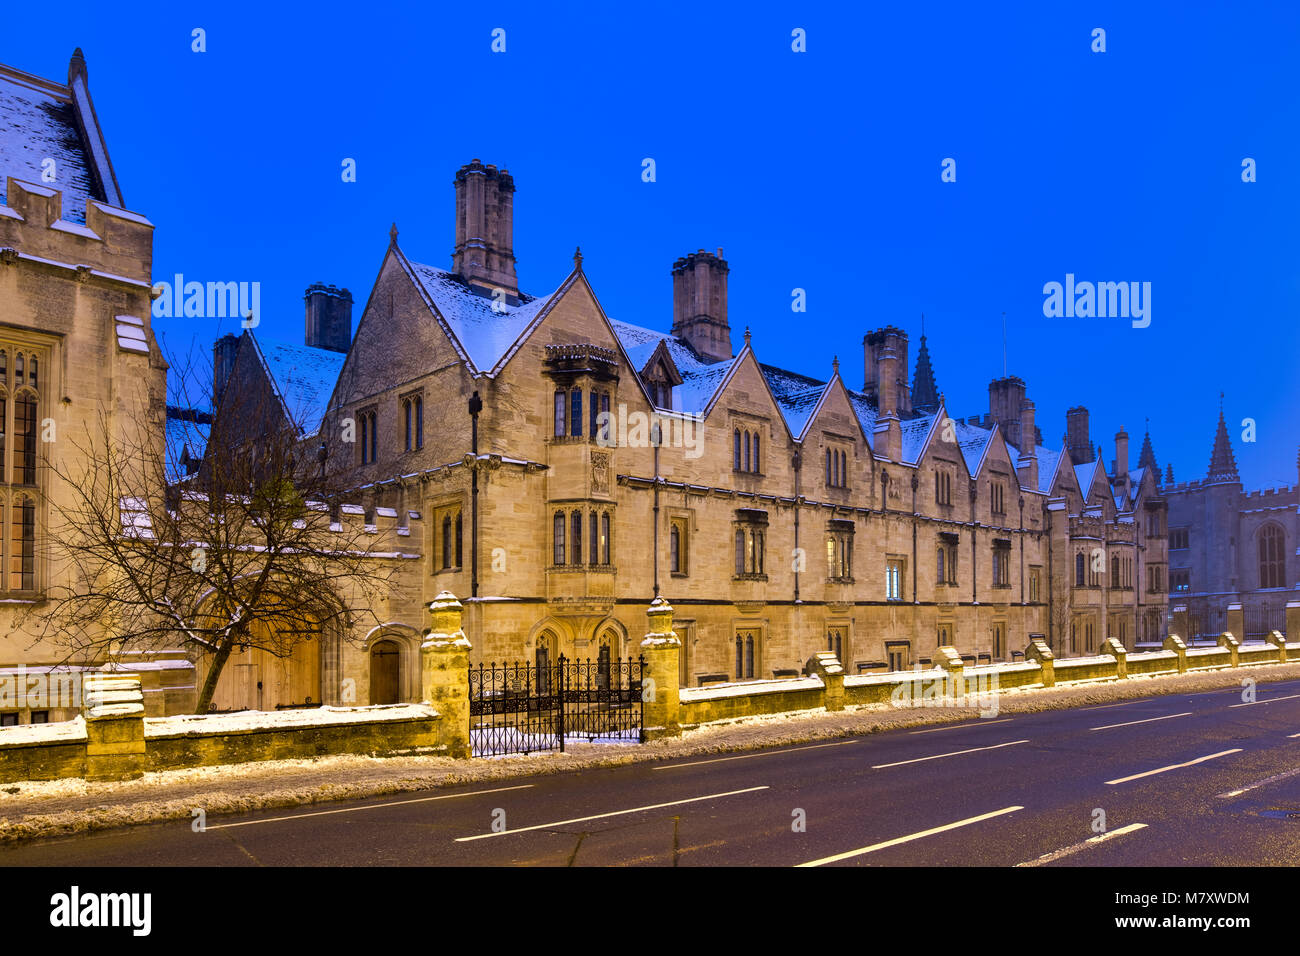 Magdalen College buildings along the high street in the snow early morning before dawn. Oxford, Oxfordshire, England Stock Photo